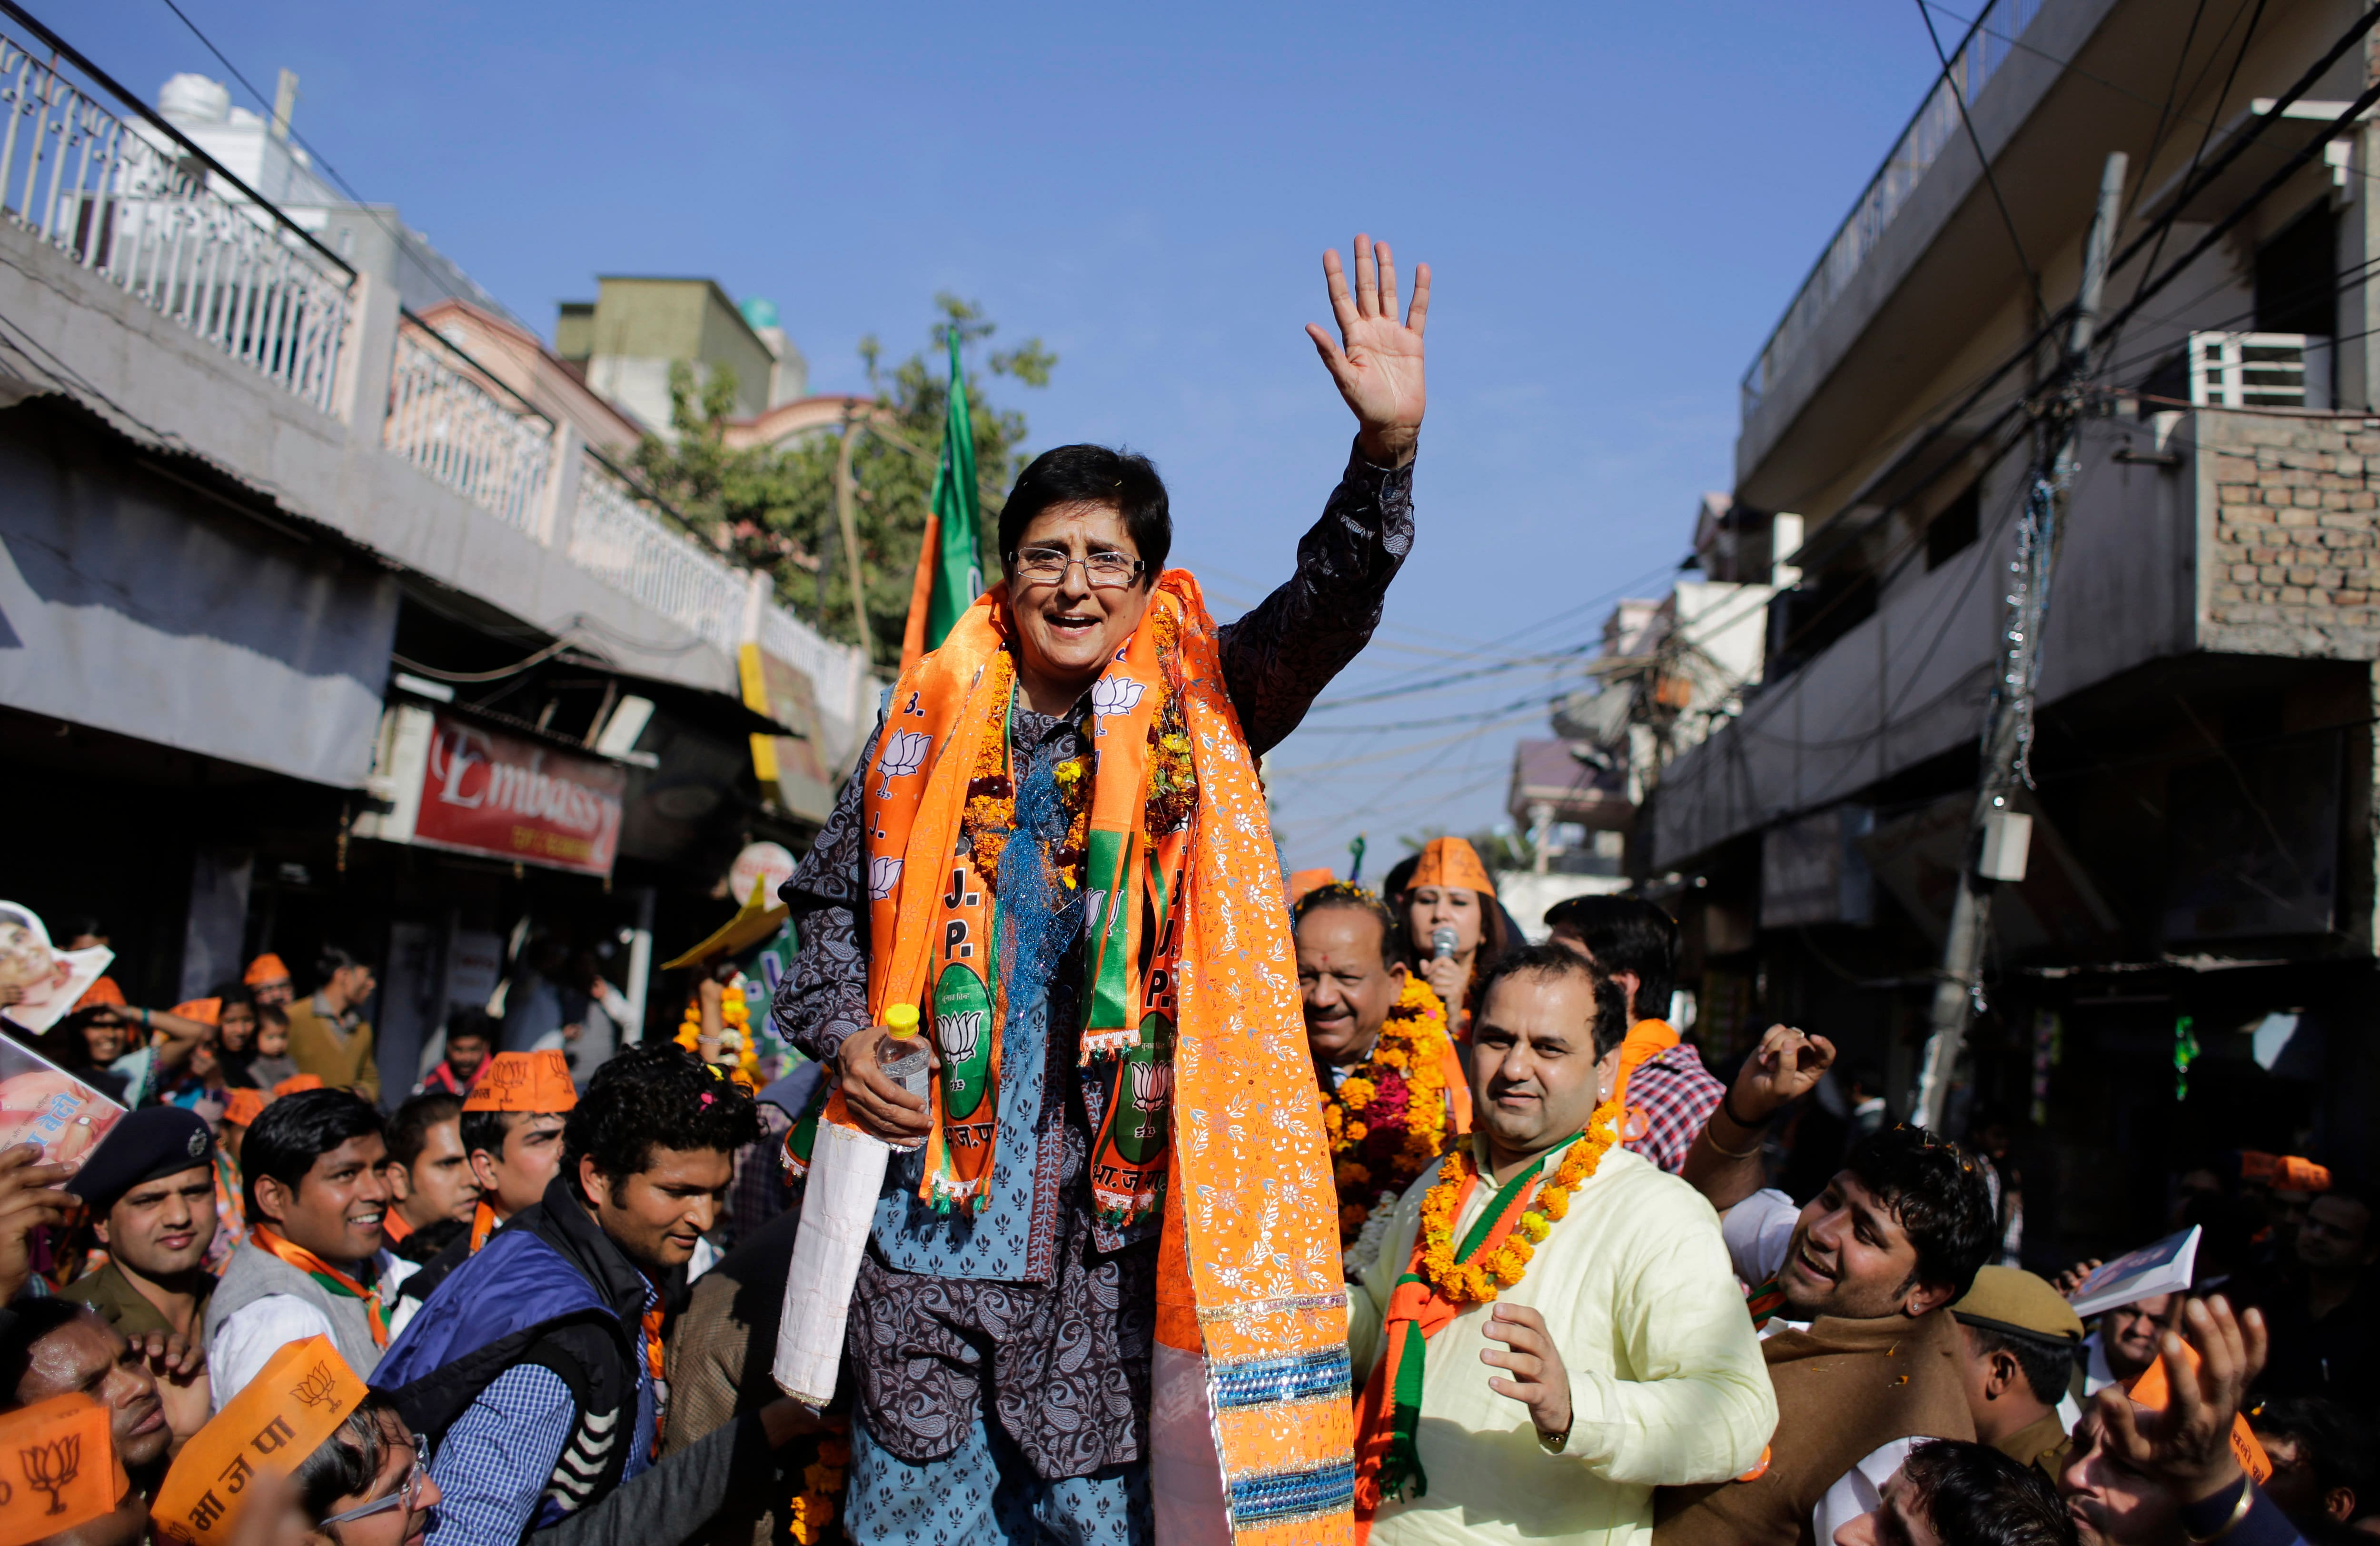 Bharatiya Janata Party (BJP) chief ministerial candidate Kiran Bedi waves to supporters during an election campaign rally ahead of Delhi state election in New Delhi.